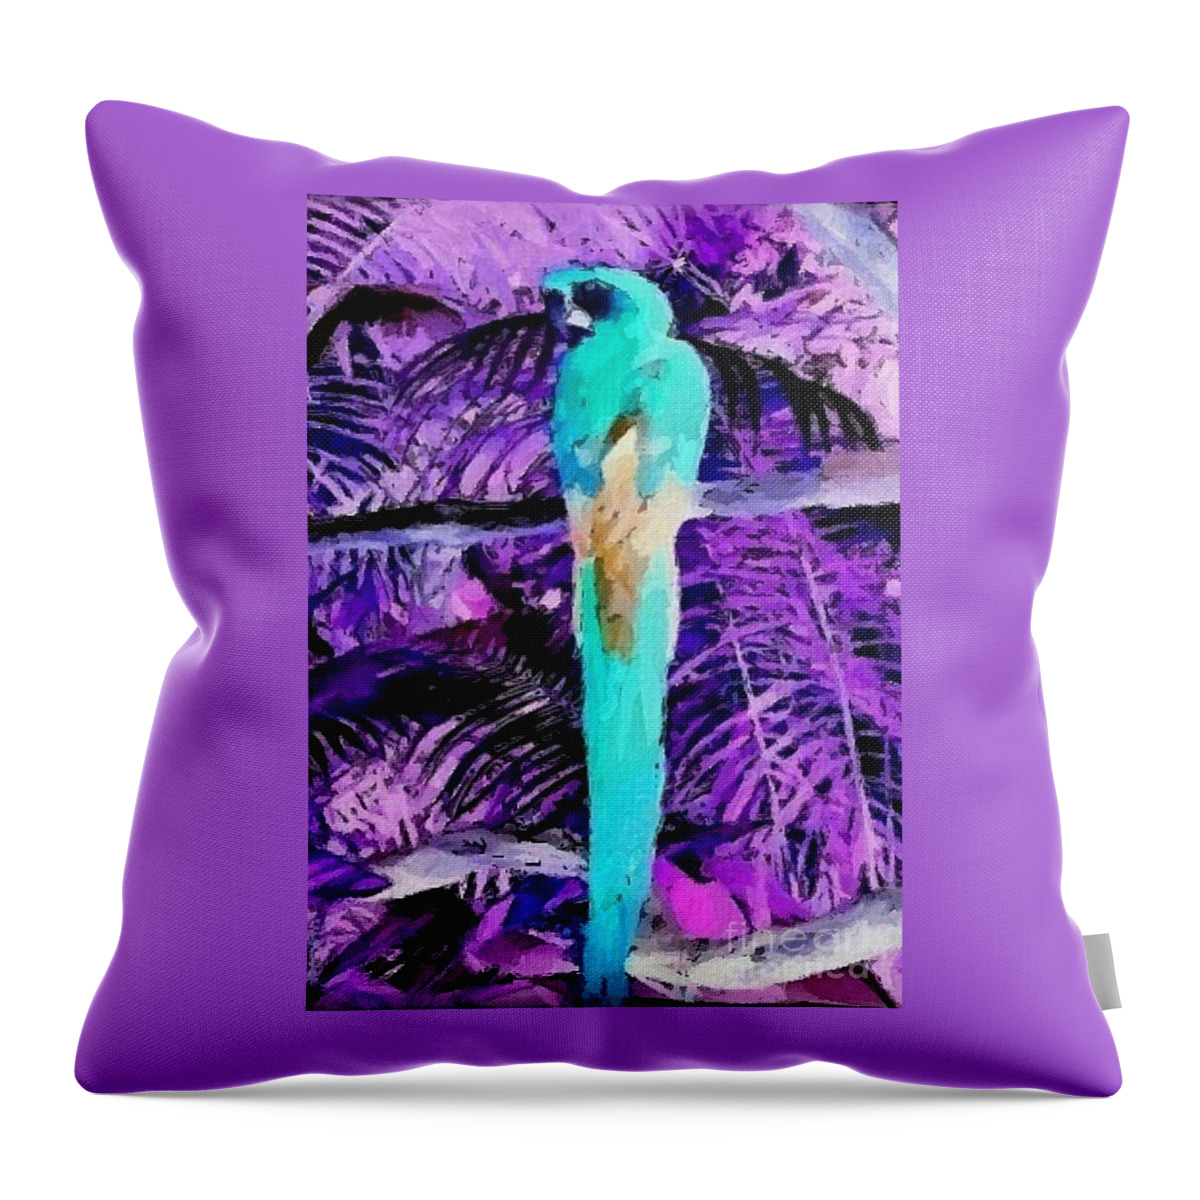 Macaw Throw Pillow featuring the mixed media Macaw Fantasy by Writermore Arts